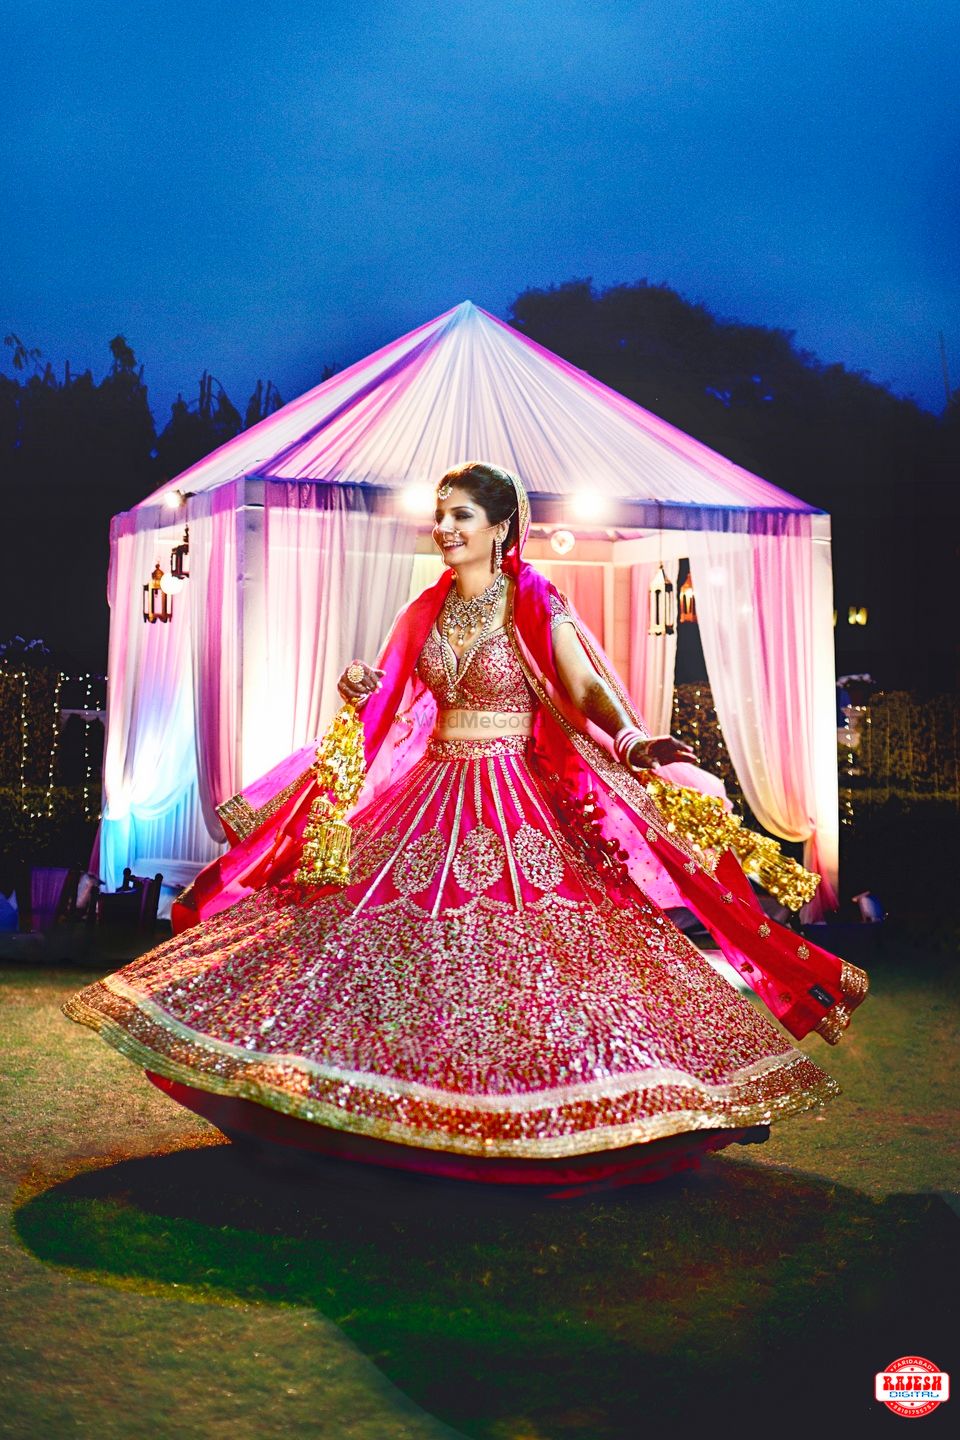 Photo of Bride Twirling in Deep Pink and Gold Wedding Lehenga